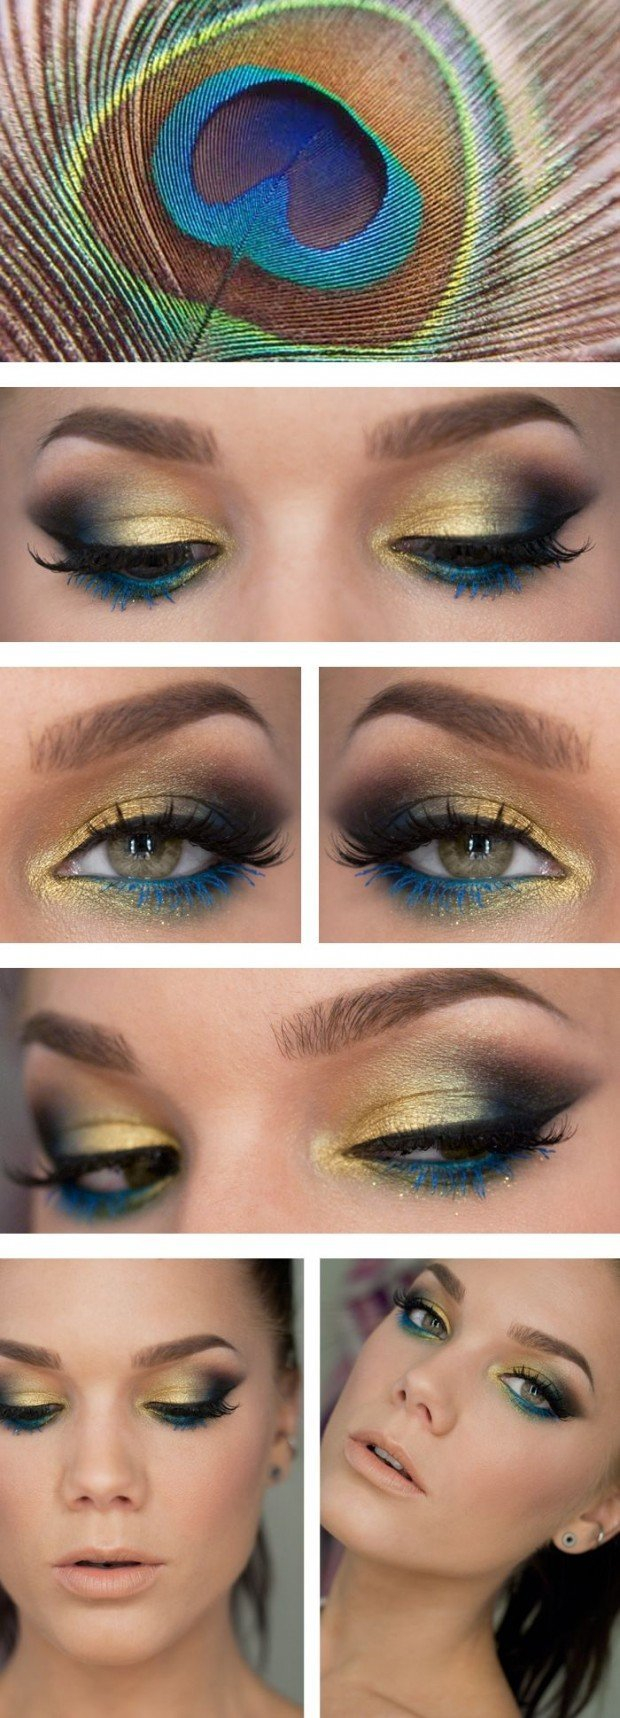 Blue And Gold Eye Makeup 15 Easy And Stylish Eye Makeup Tutorials How To Wear Eye Makeup